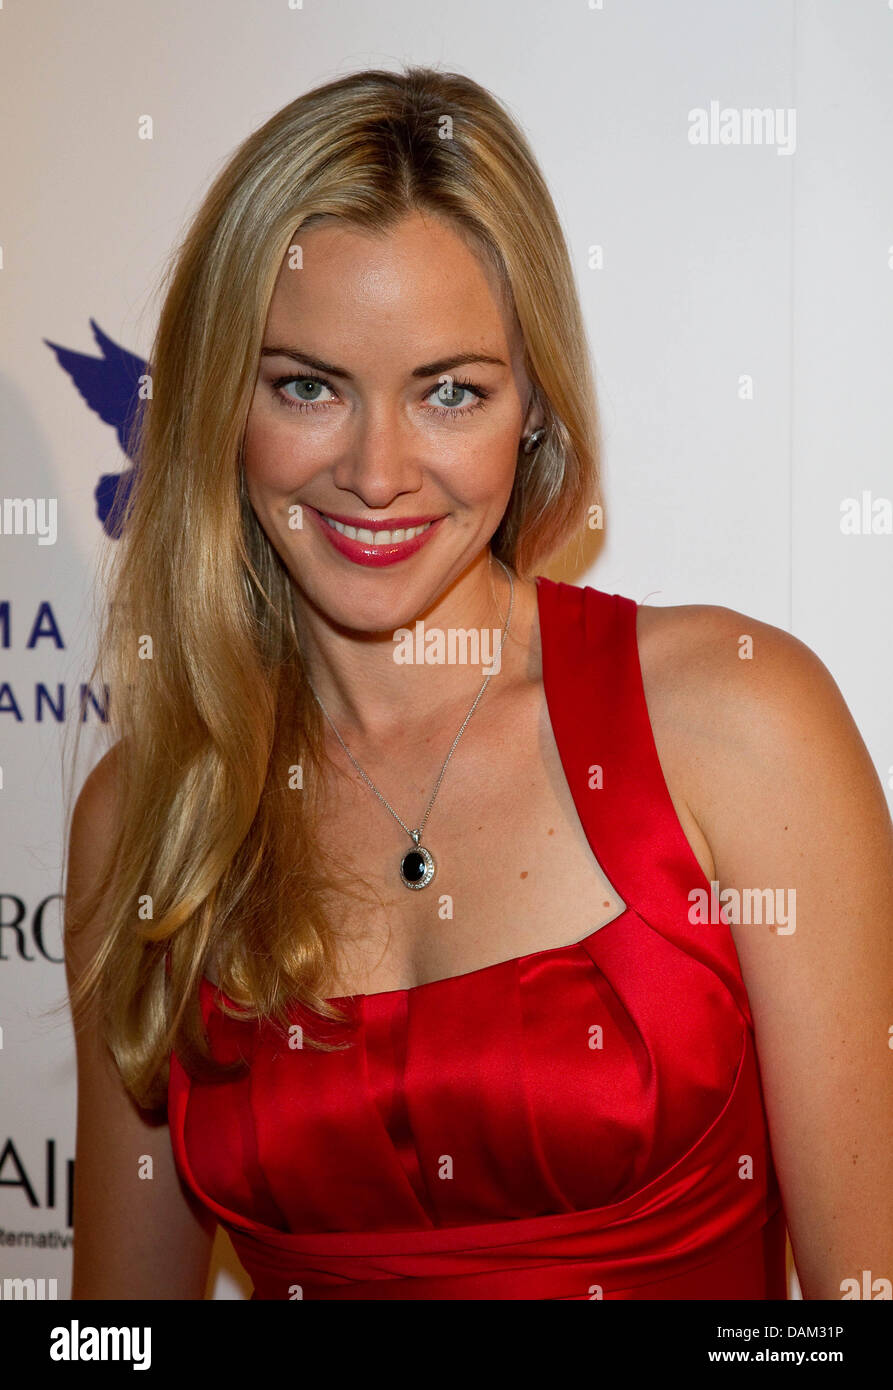 US actress Kristanna Loken attends the Cinema For Peace dinner during the 64th Cannes International Film Festival at Hotel Carlton in Cannes, France, on 18 May 2011. Photo: Hubert Boesl Stock Photo